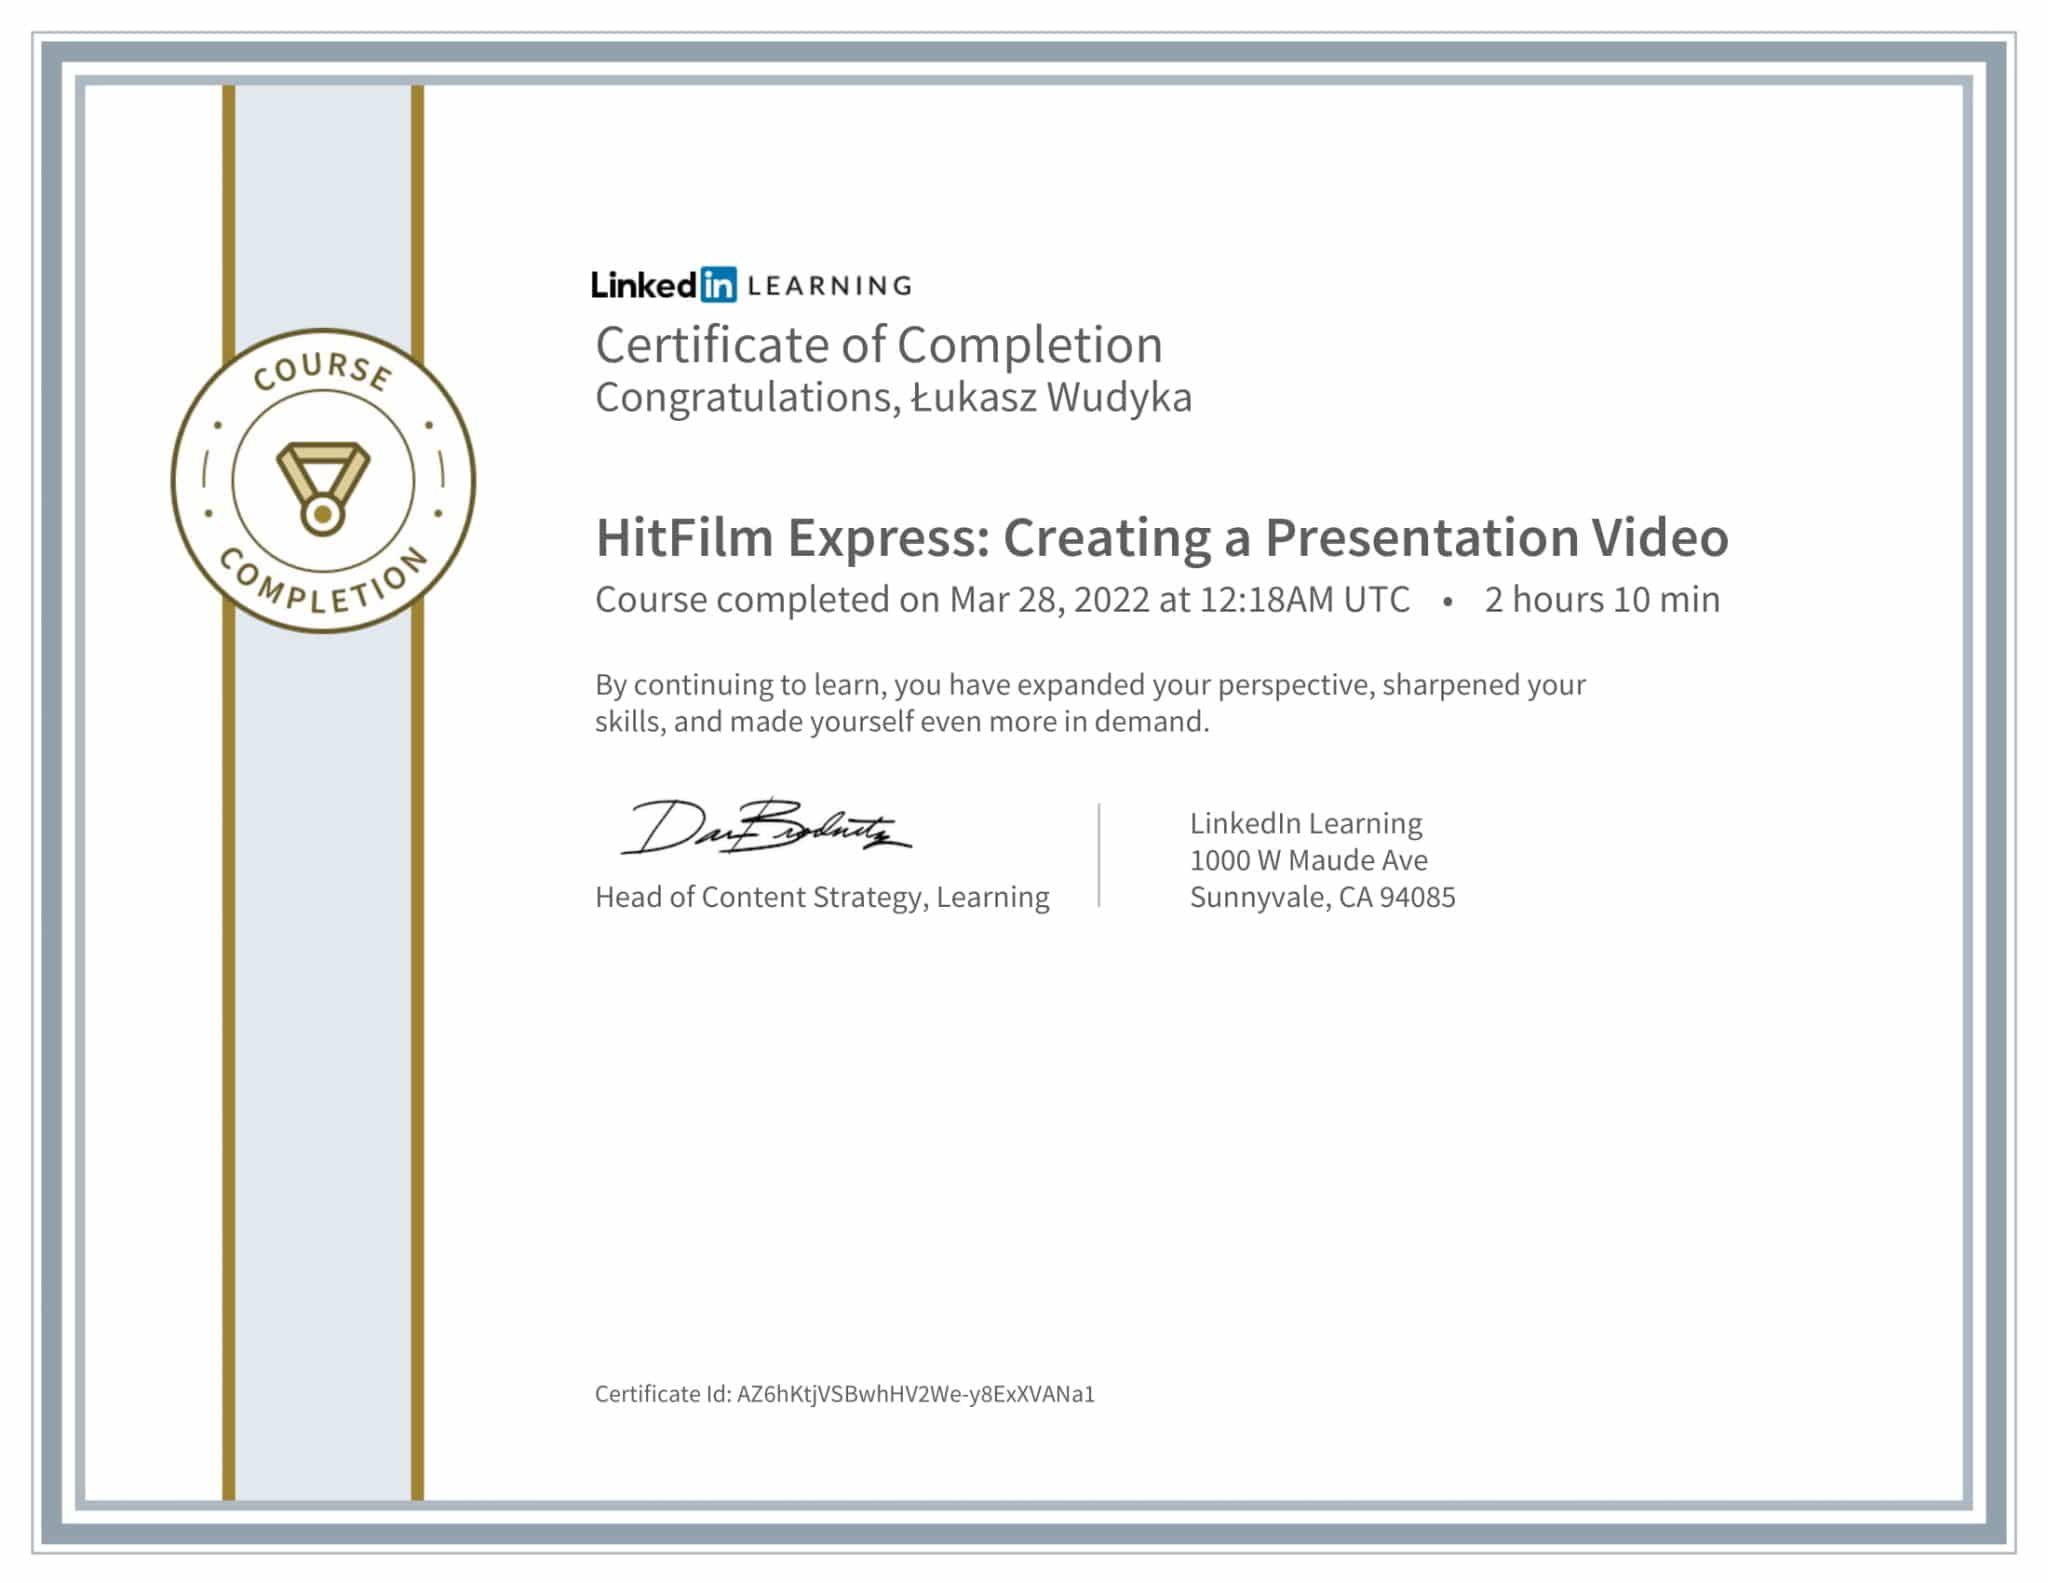 CertificateOfCompletion_HitFilm Express Creating a Presentation Video-1